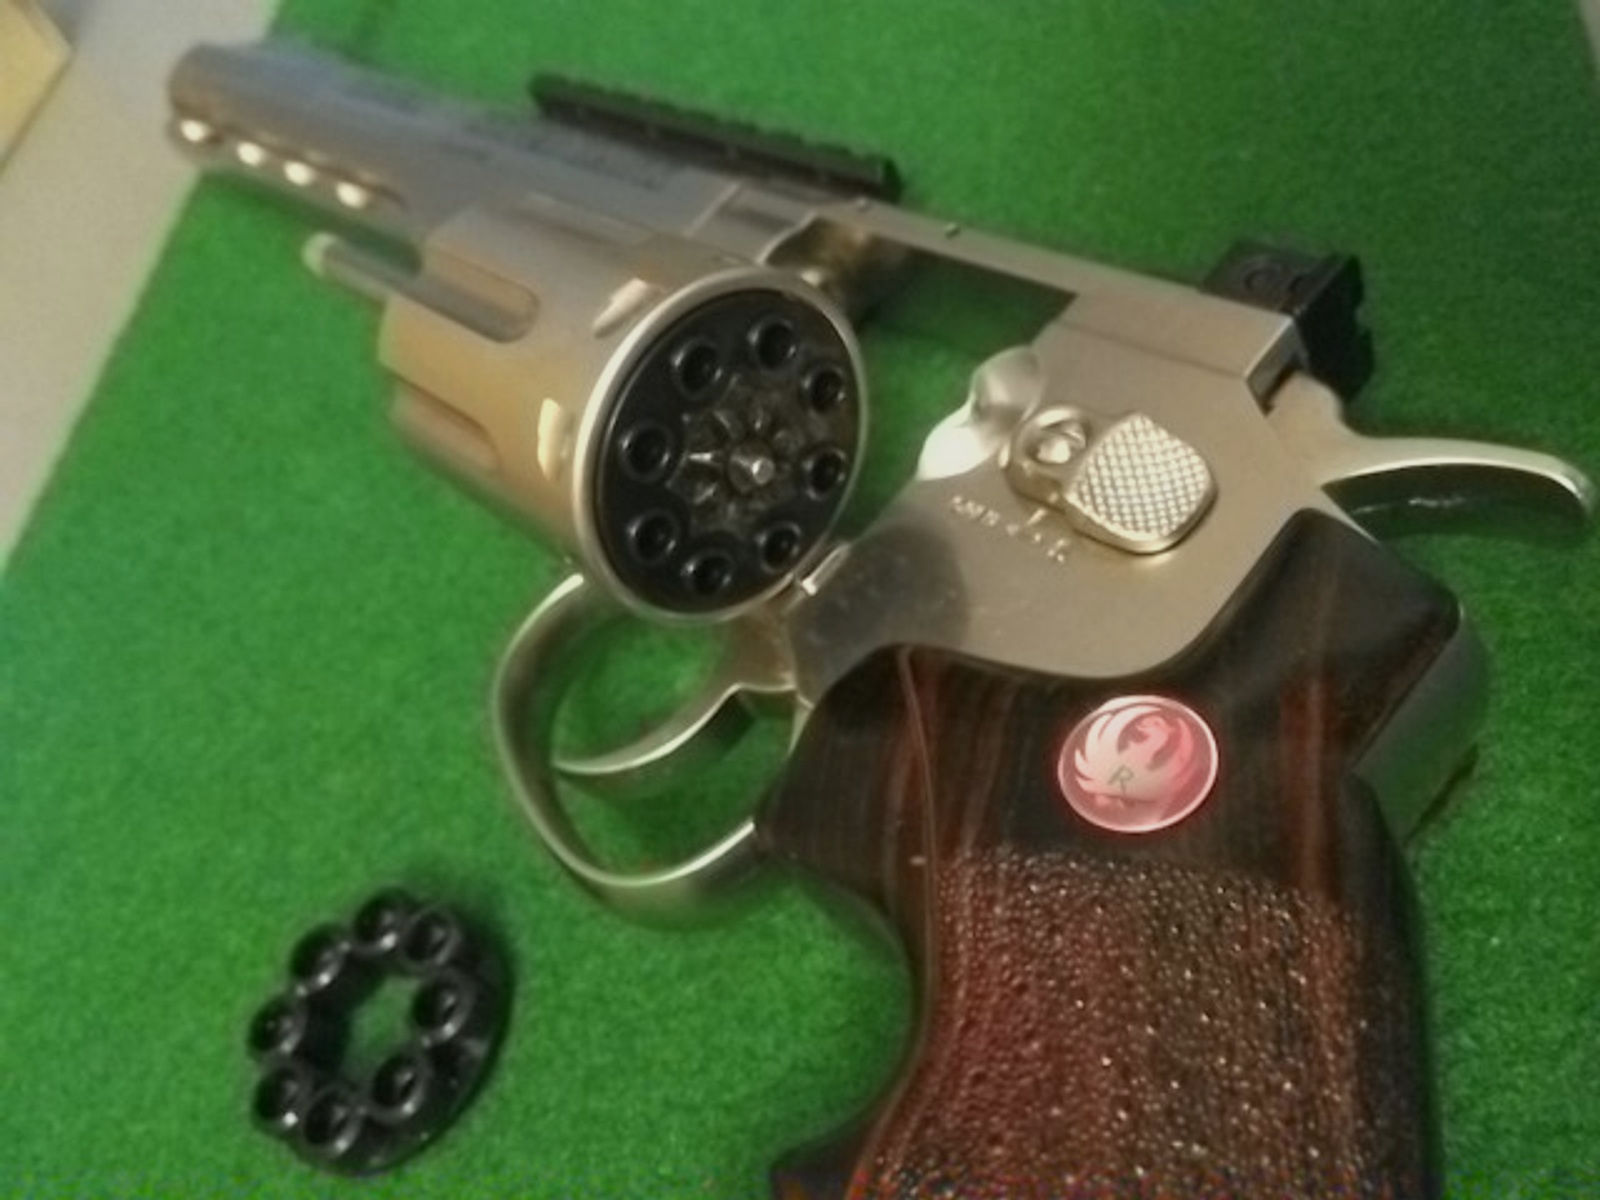 CO2-Revolver Ruger Super Hawk "Stainless" Airsoft